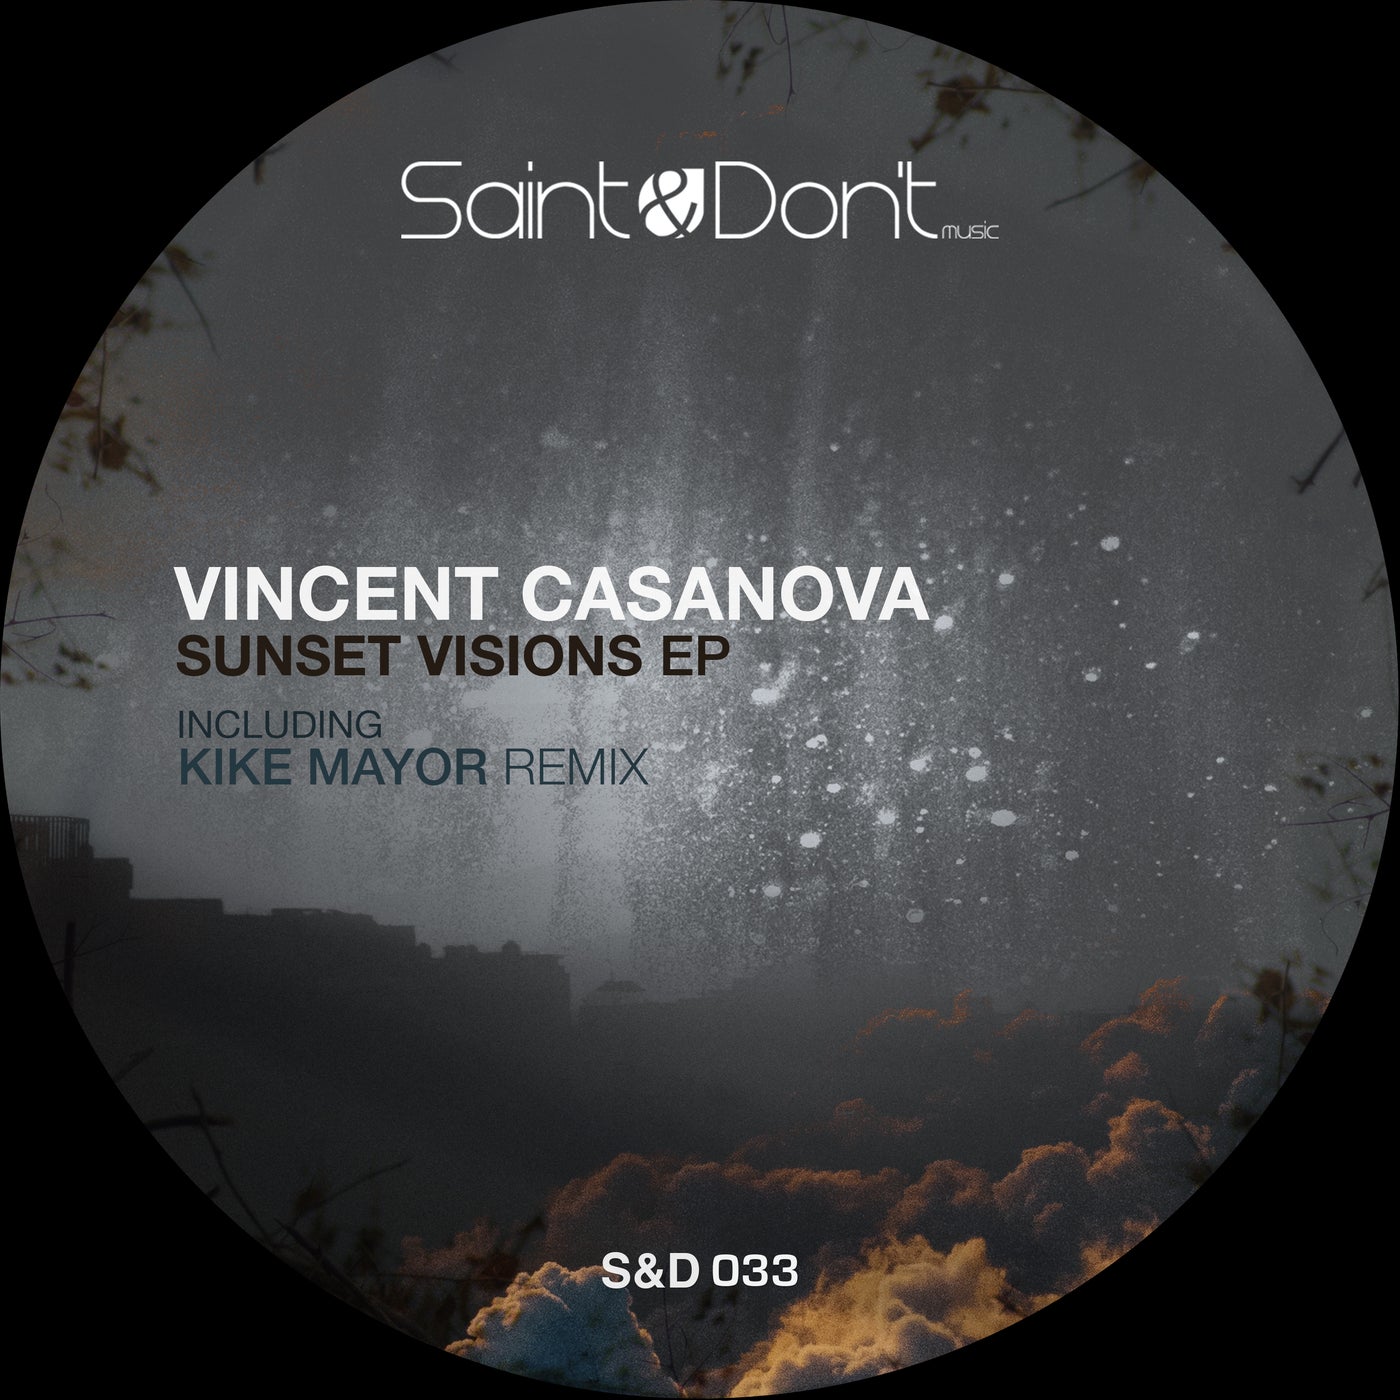 Sunset Visions EP